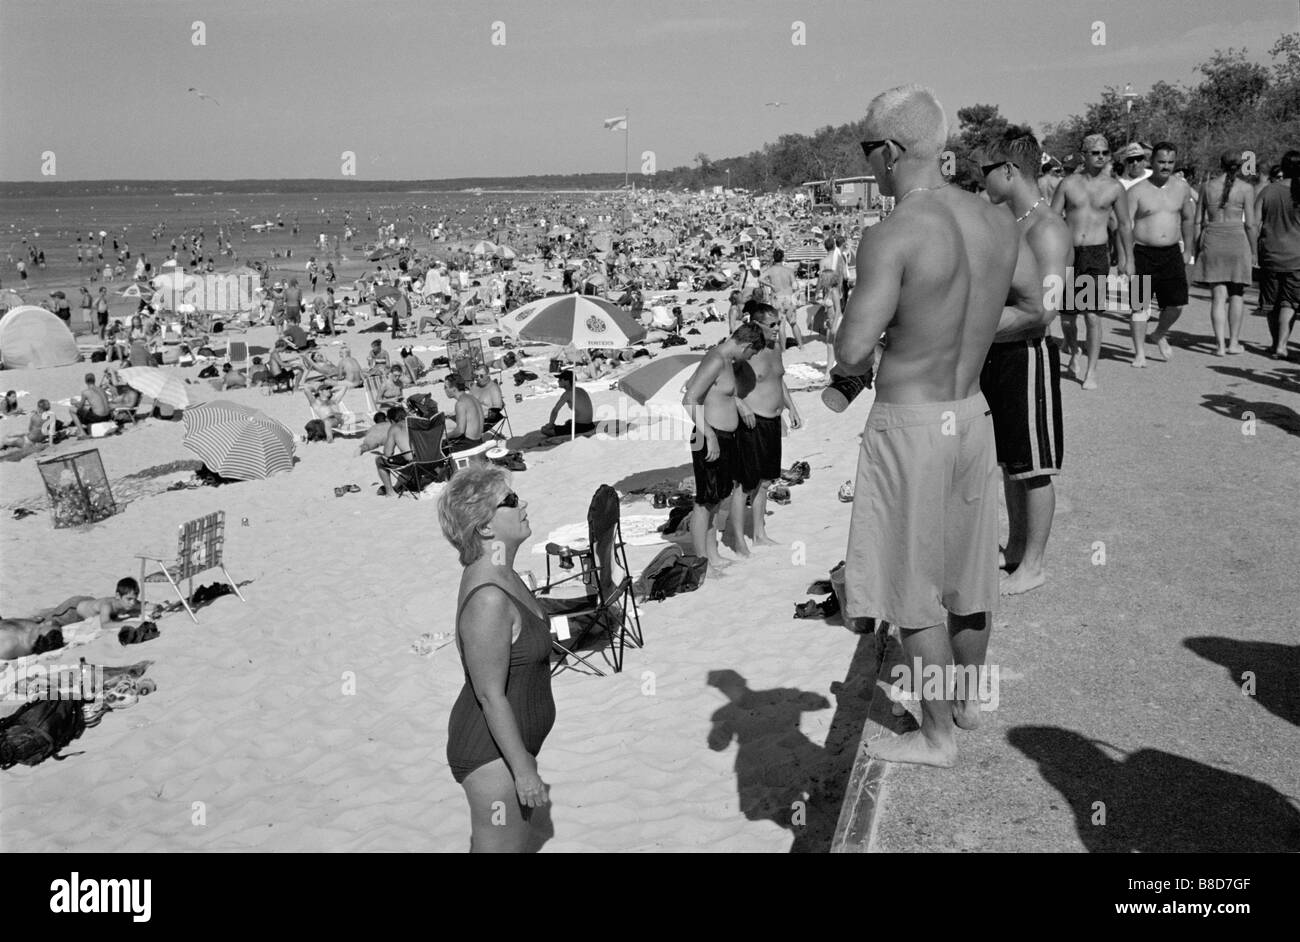 Crowded beach Black and White Stock Photos & Images - Alamy